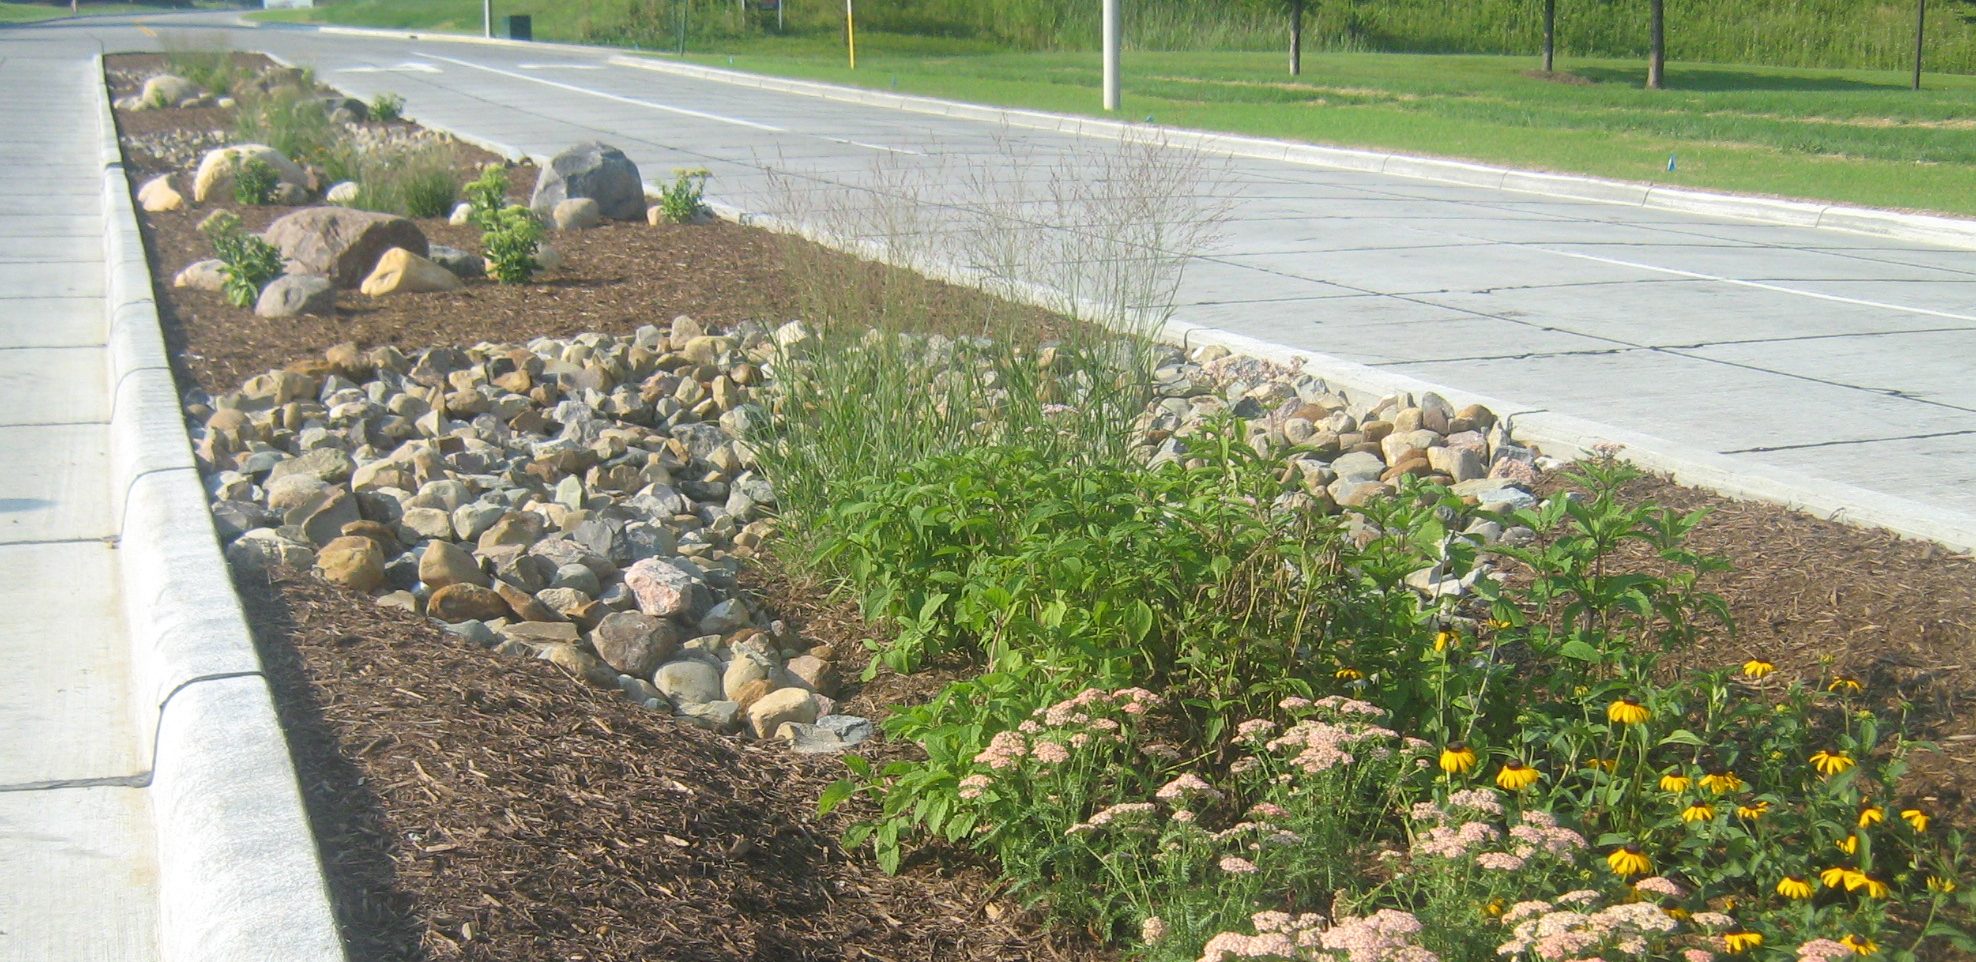 TOUR: Successful Green Infrastructure Grant Projects